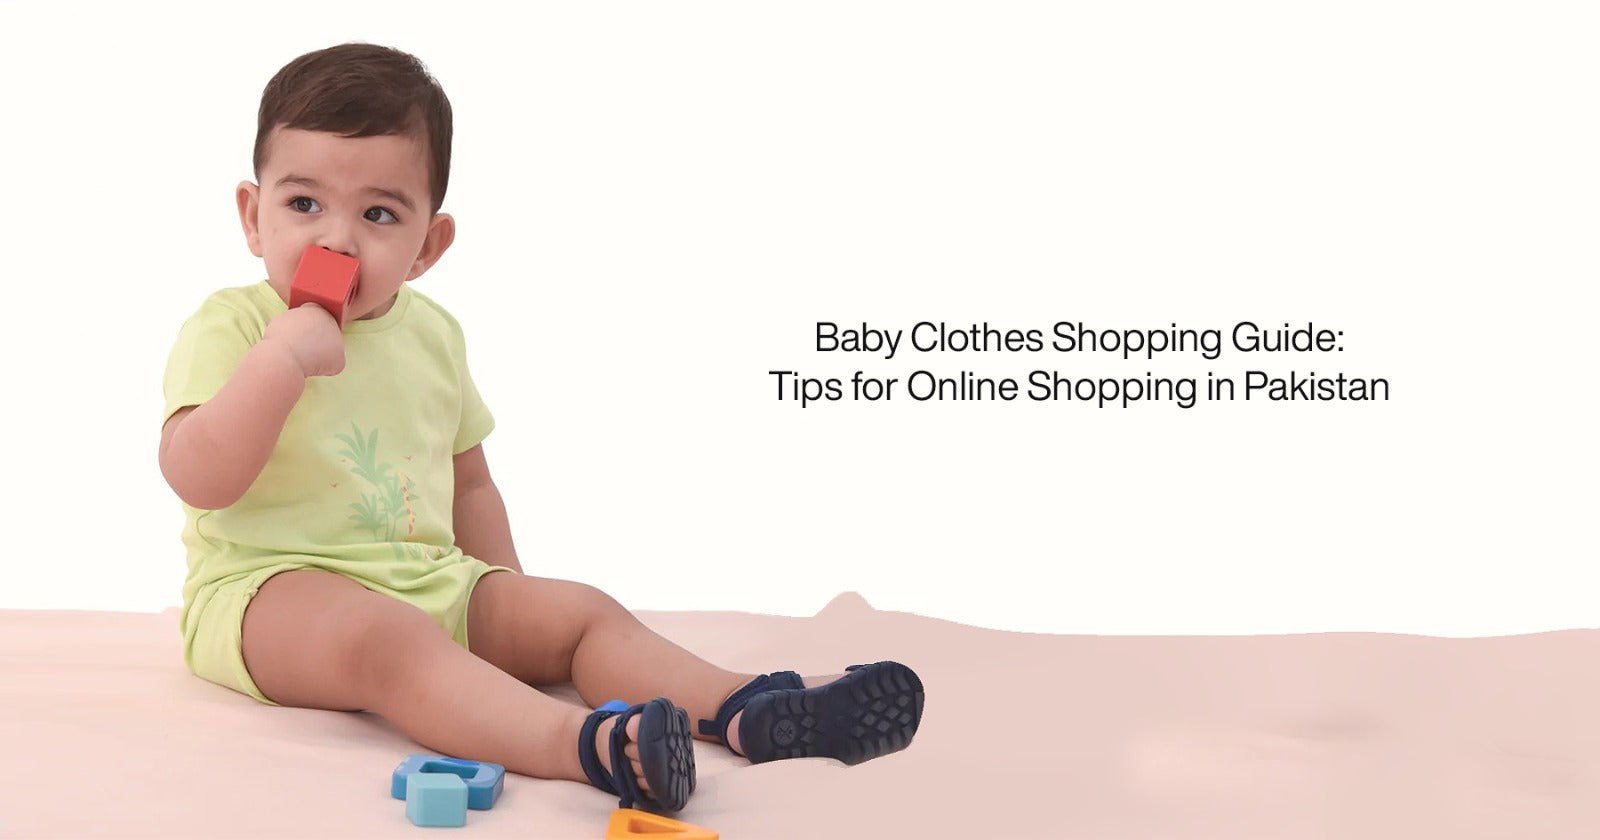 Baby Clothes Shopping Guide: Tips for Online Shopping in Pakistan